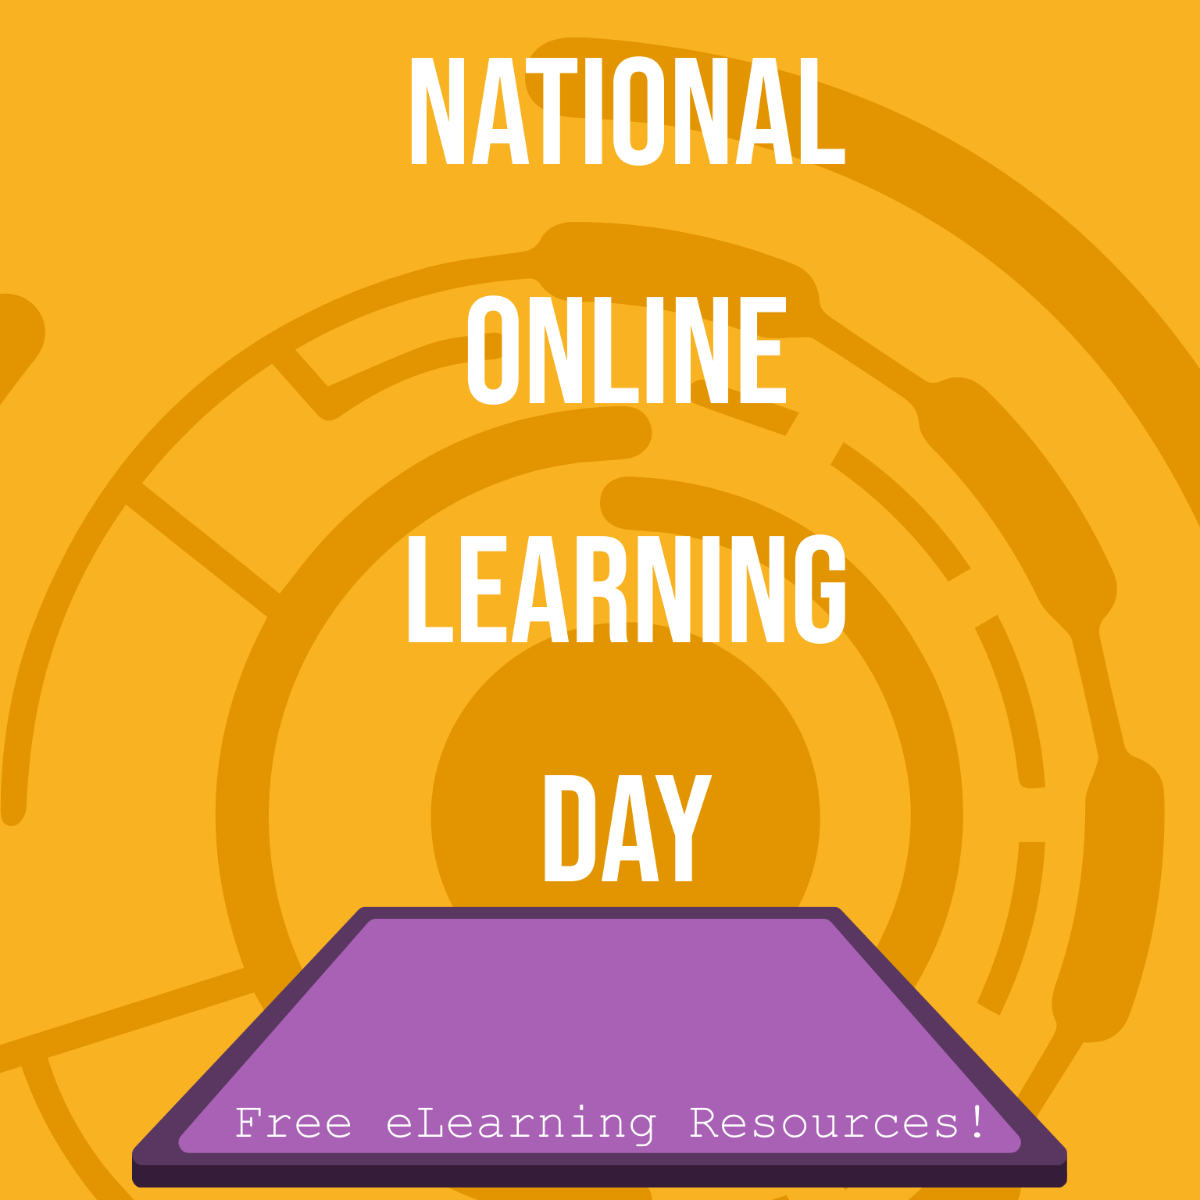 National Online Learning Day Flyer Vector